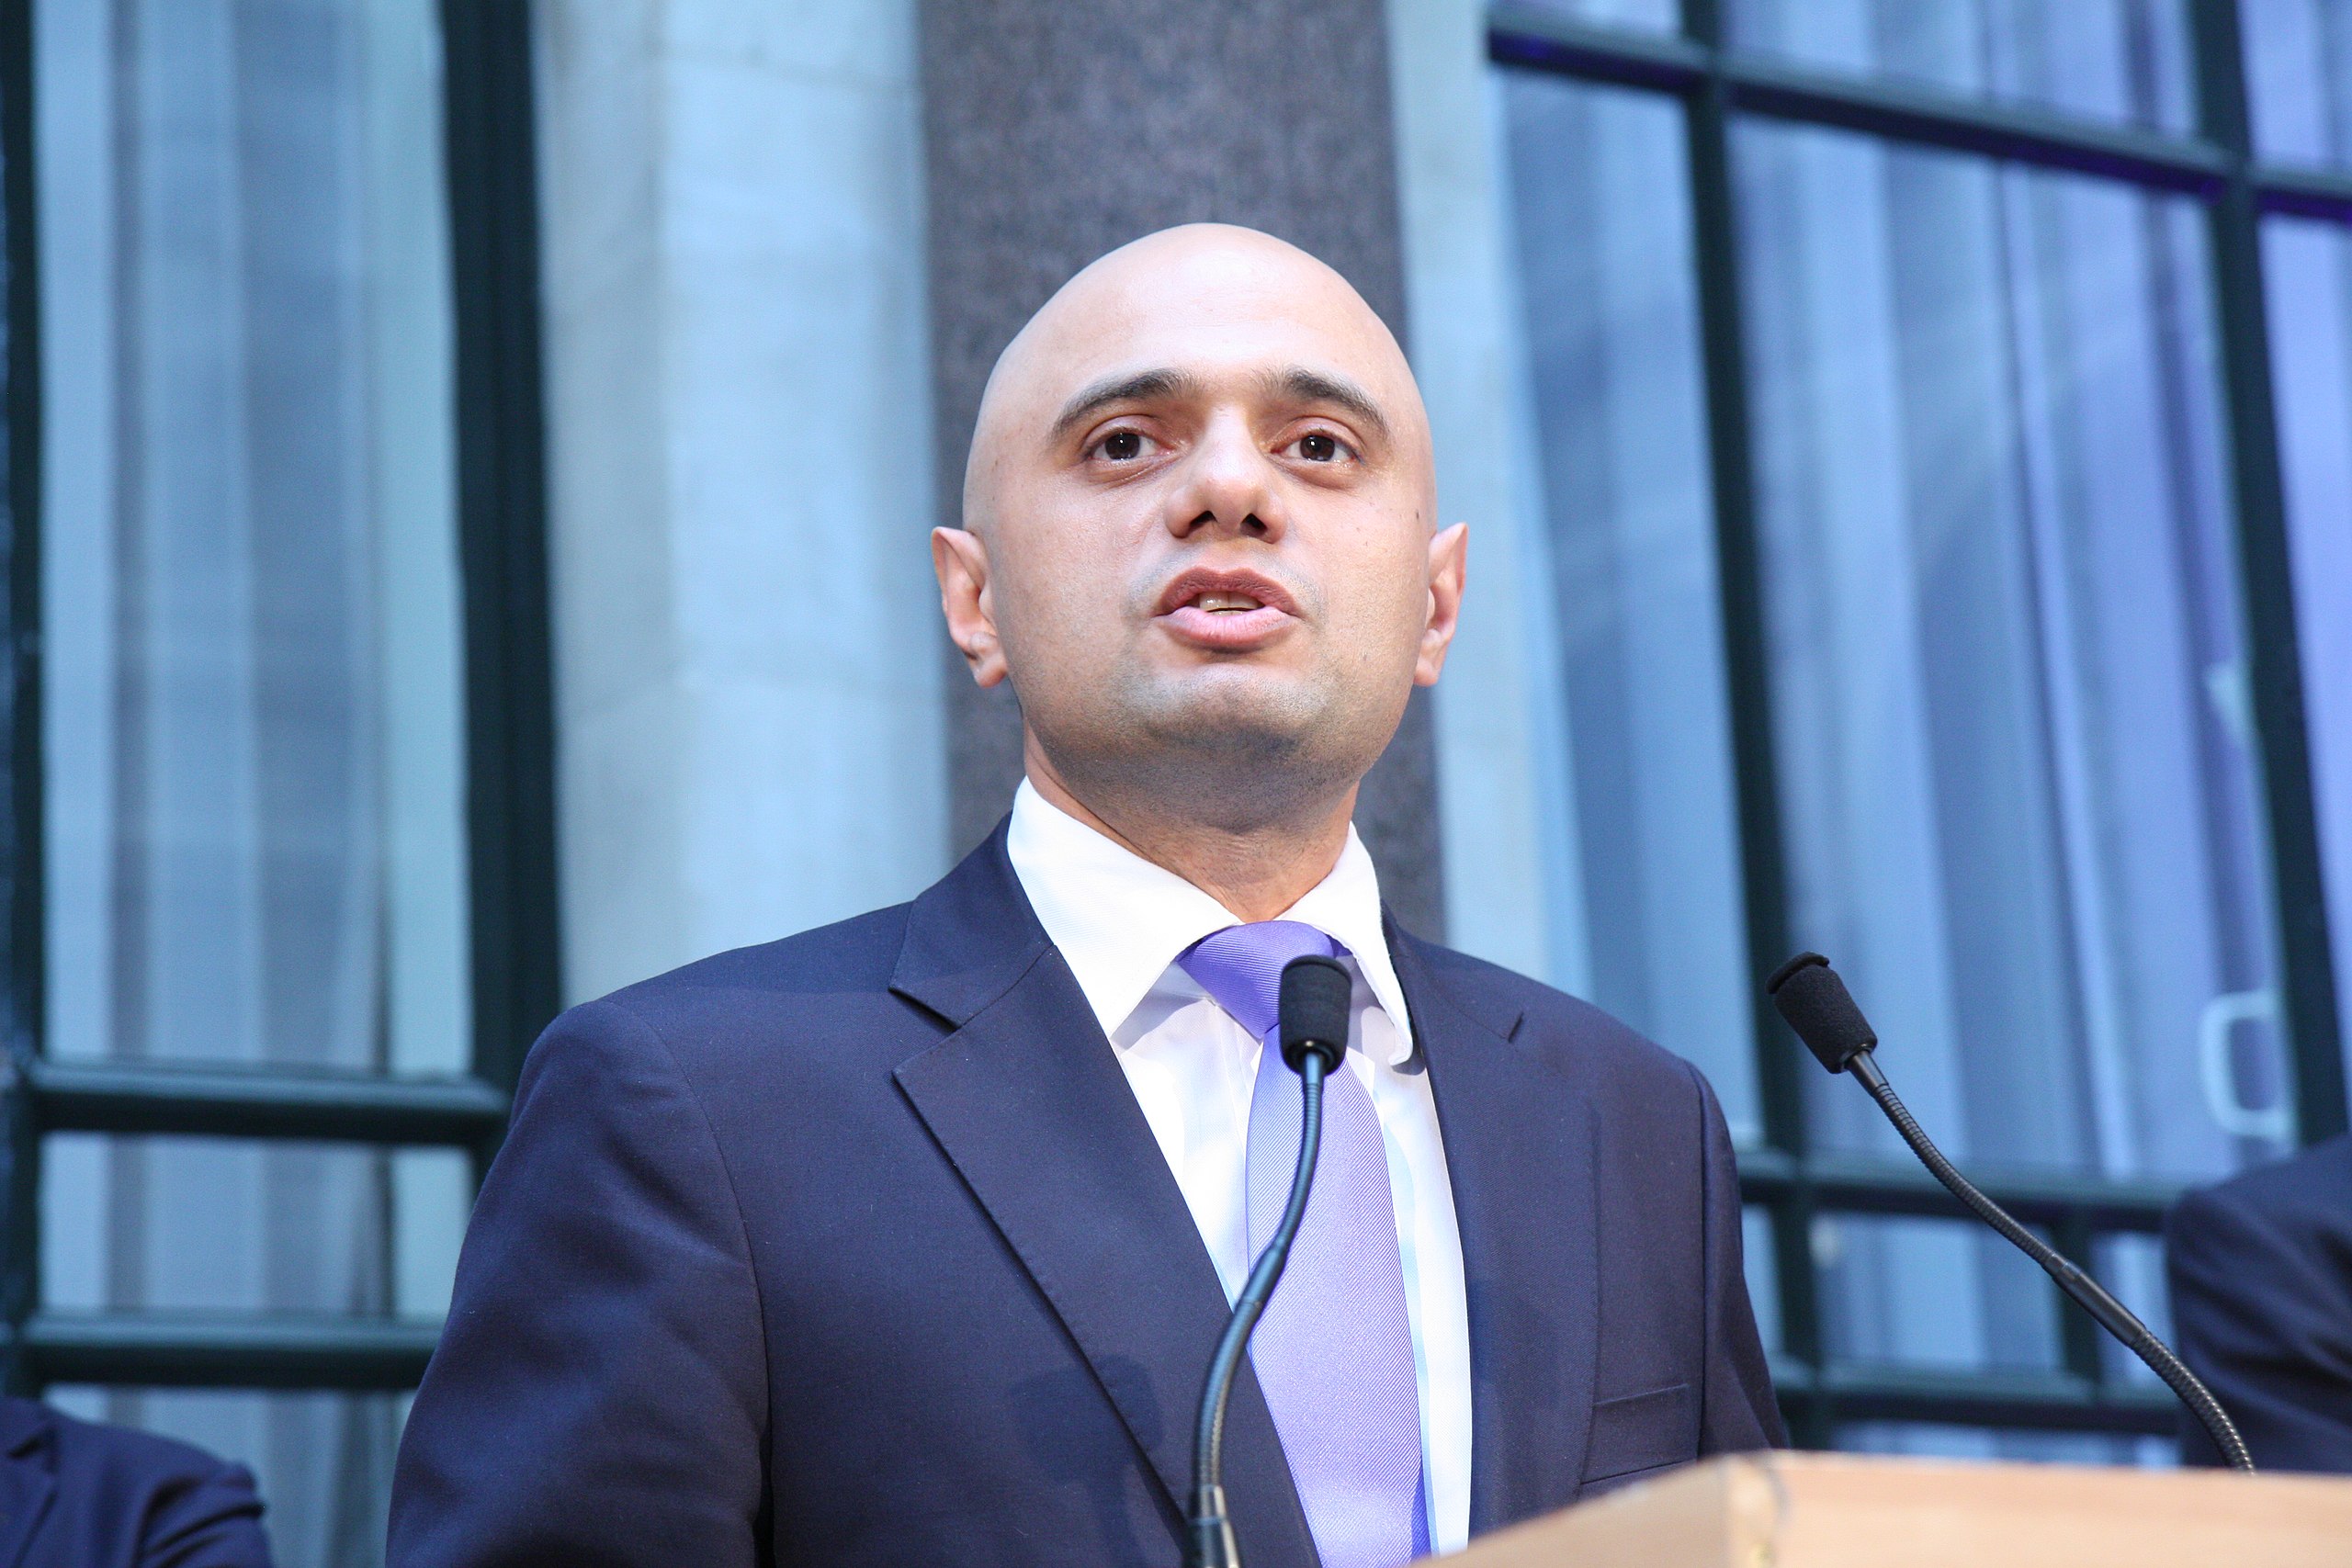 Press photo of Sajid Javid MP, a candidate in the tory leadership race